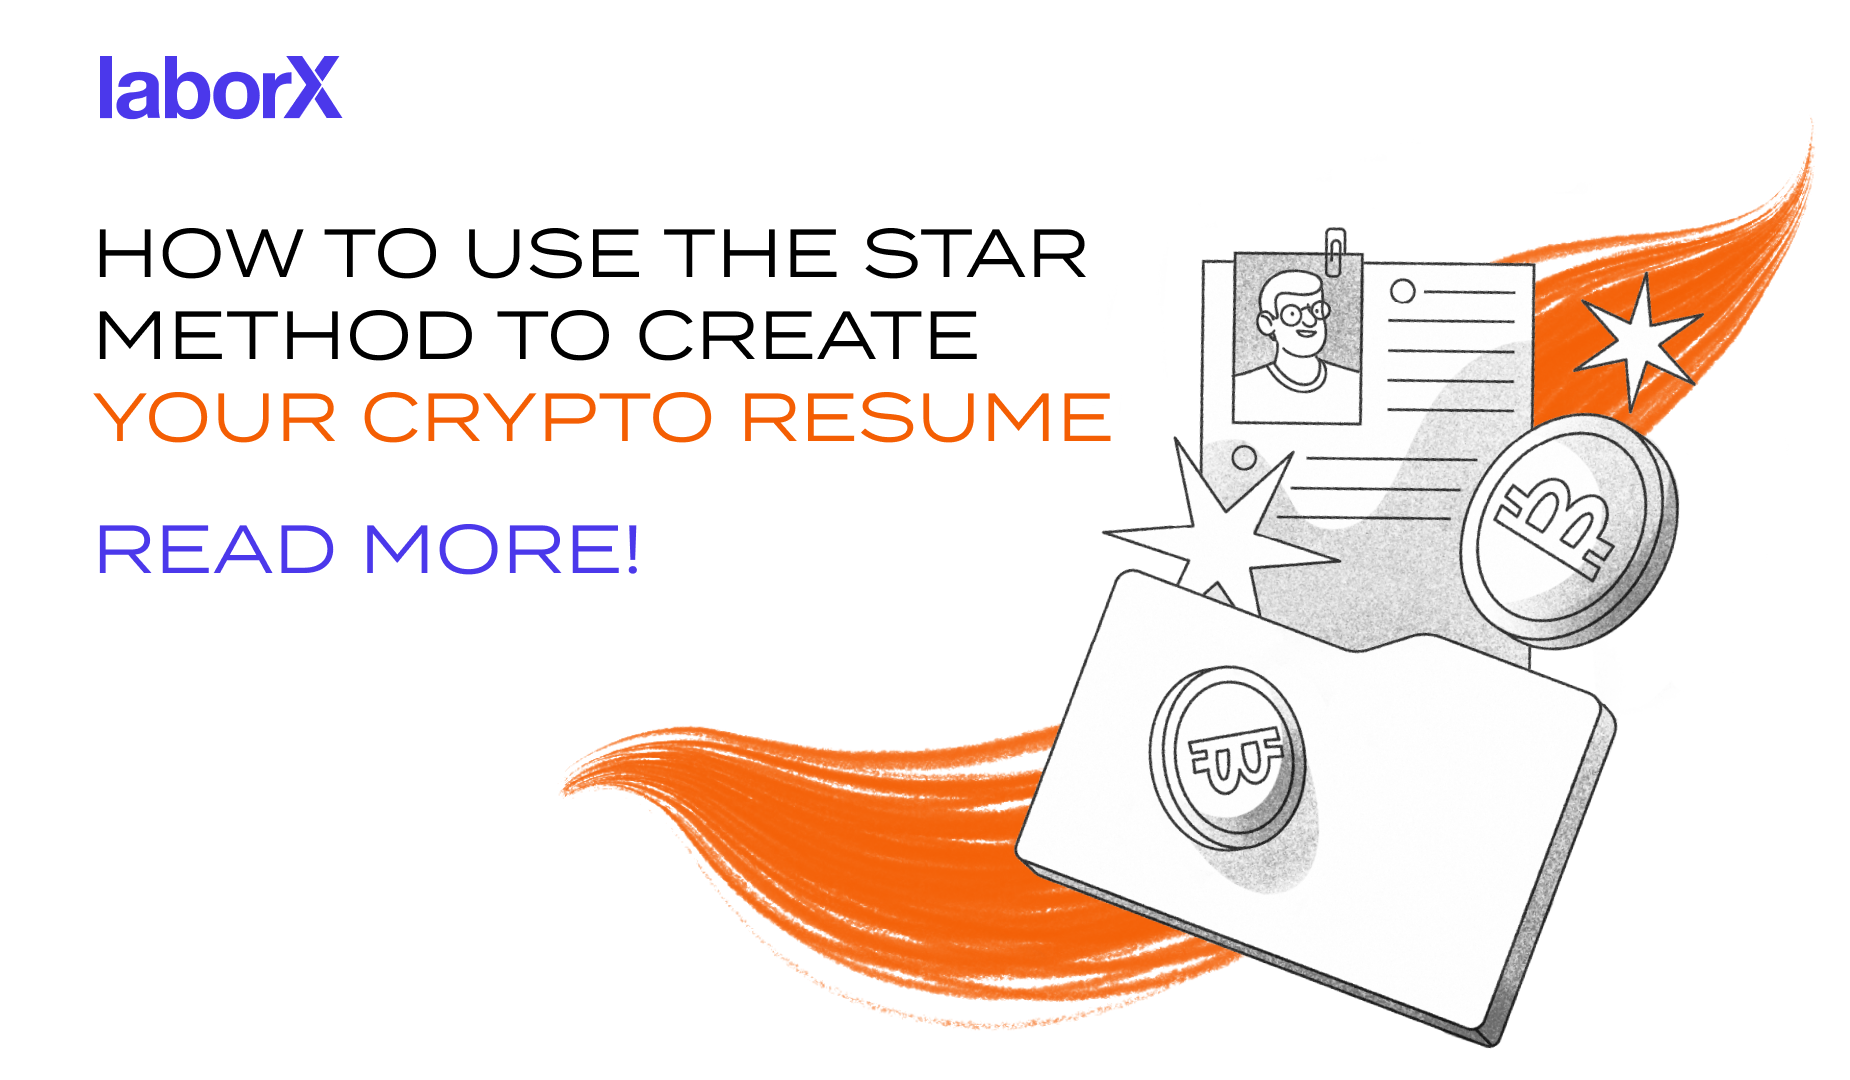 How To Use The Star Method To Create Your Crypto Resume